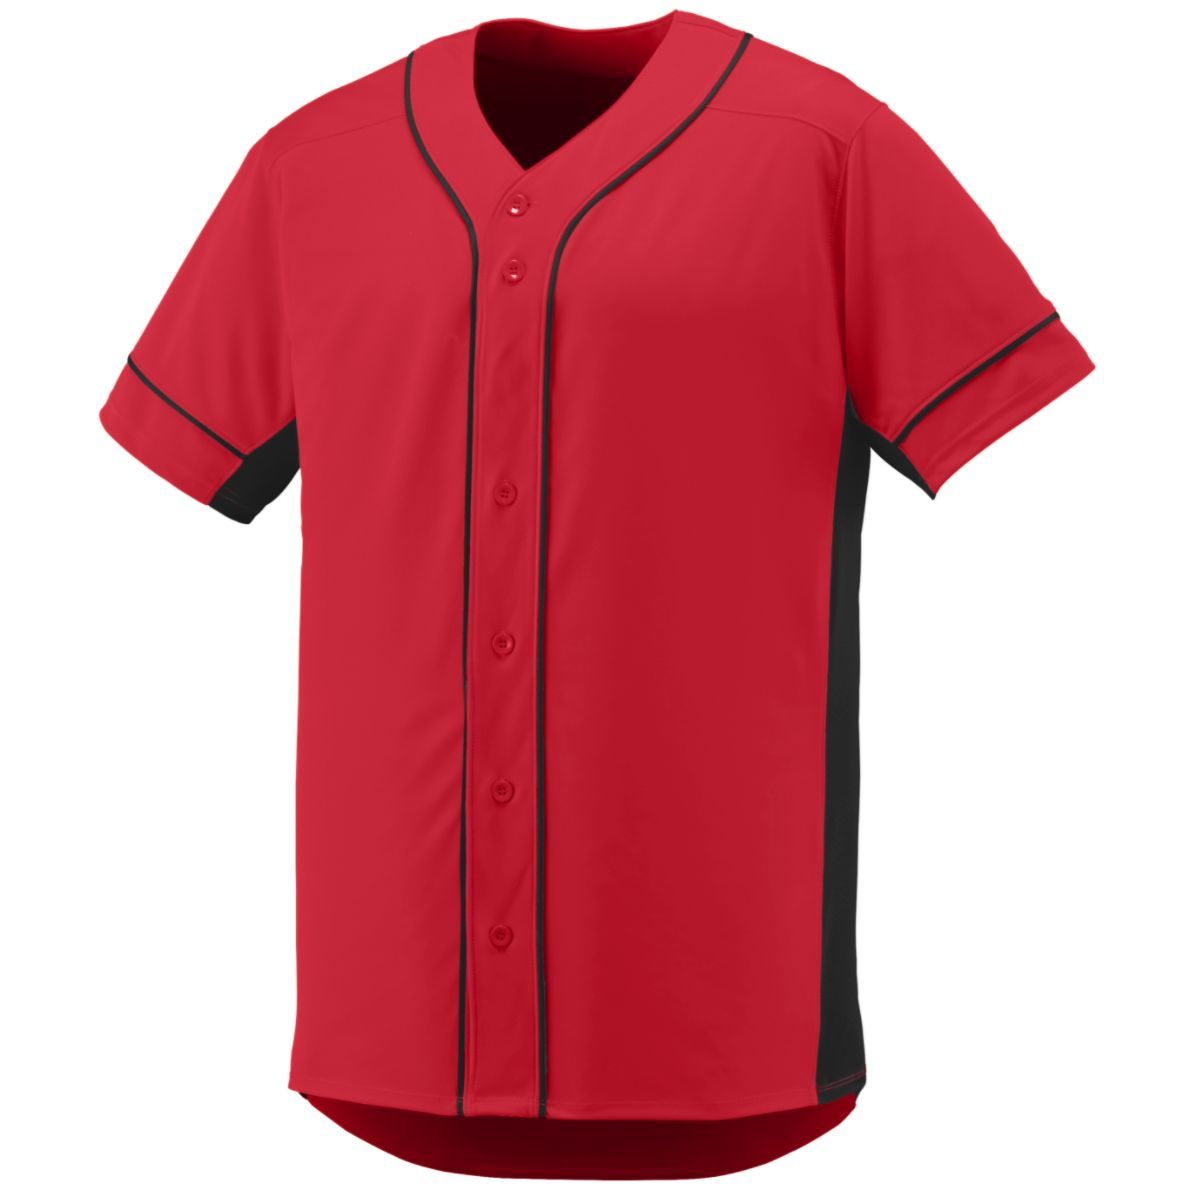 Augusta Sportswear Youth Slugger Jersey in Red/Black  -Part of the Youth, Youth-Jersey, Augusta-Products, Baseball, Shirts, All-Sports, All-Sports-1 product lines at KanaleyCreations.com